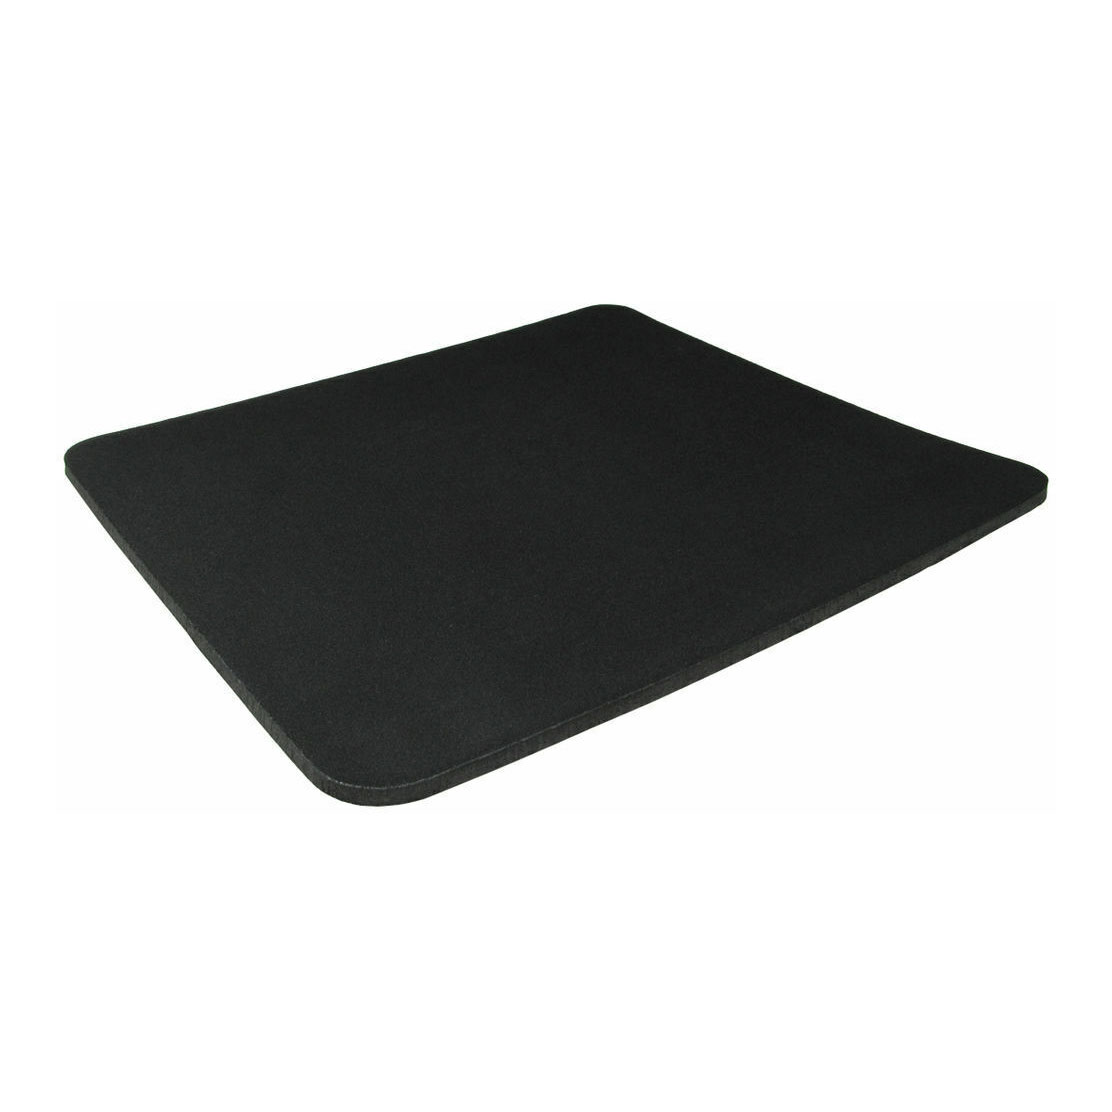 Xclio All Rounder Mouse Mat Non Slip Black LN25415 - MM-01 | SCAN UK